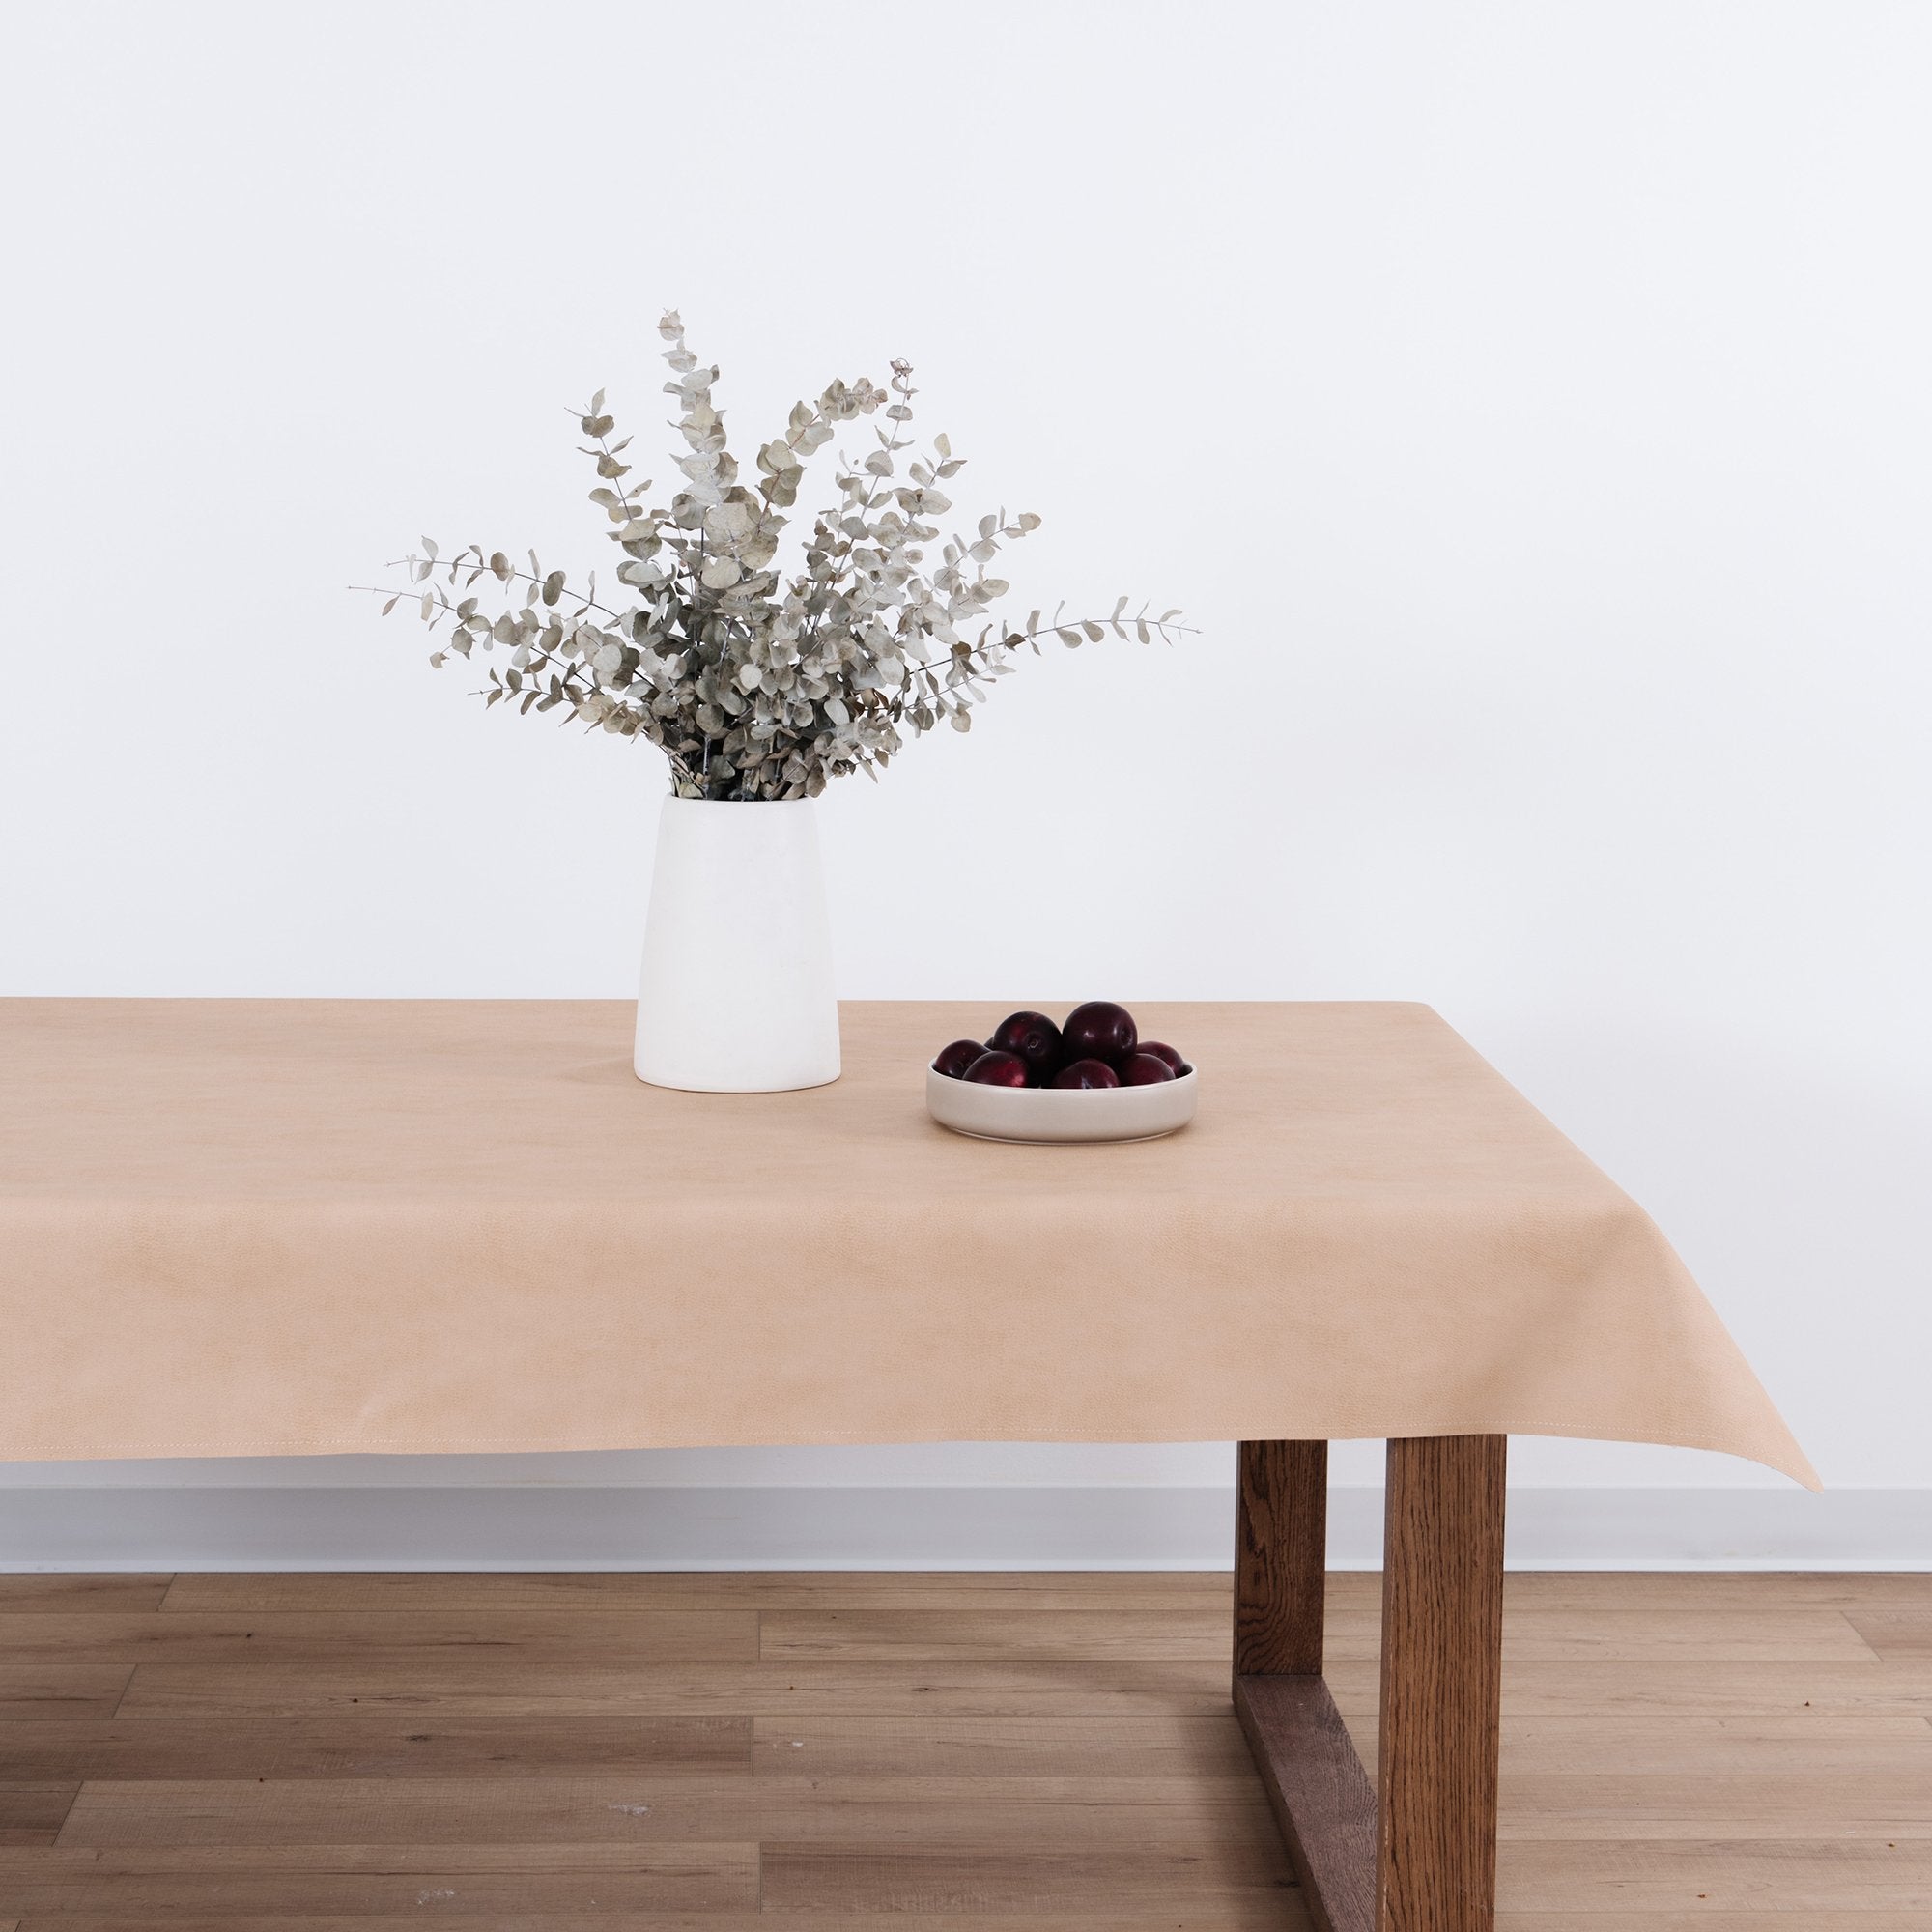 Untanned (on sale) / 8 Foot@Untanned Tablecloth on dining table